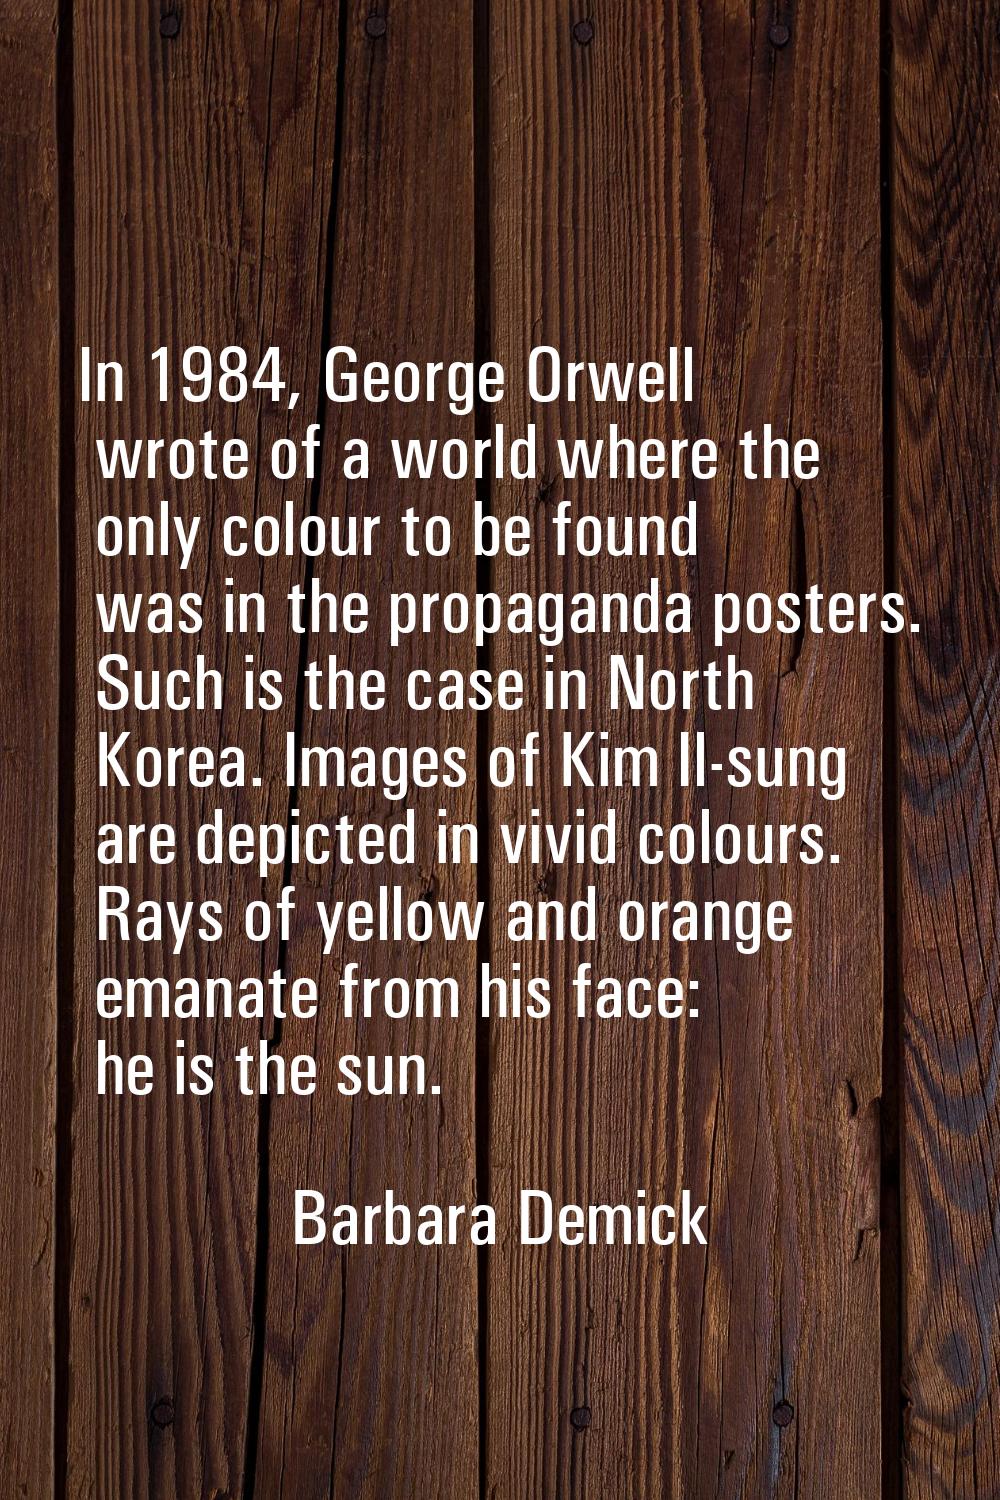 In 1984, George Orwell wrote of a world where the only colour to be found was in the propaganda pos